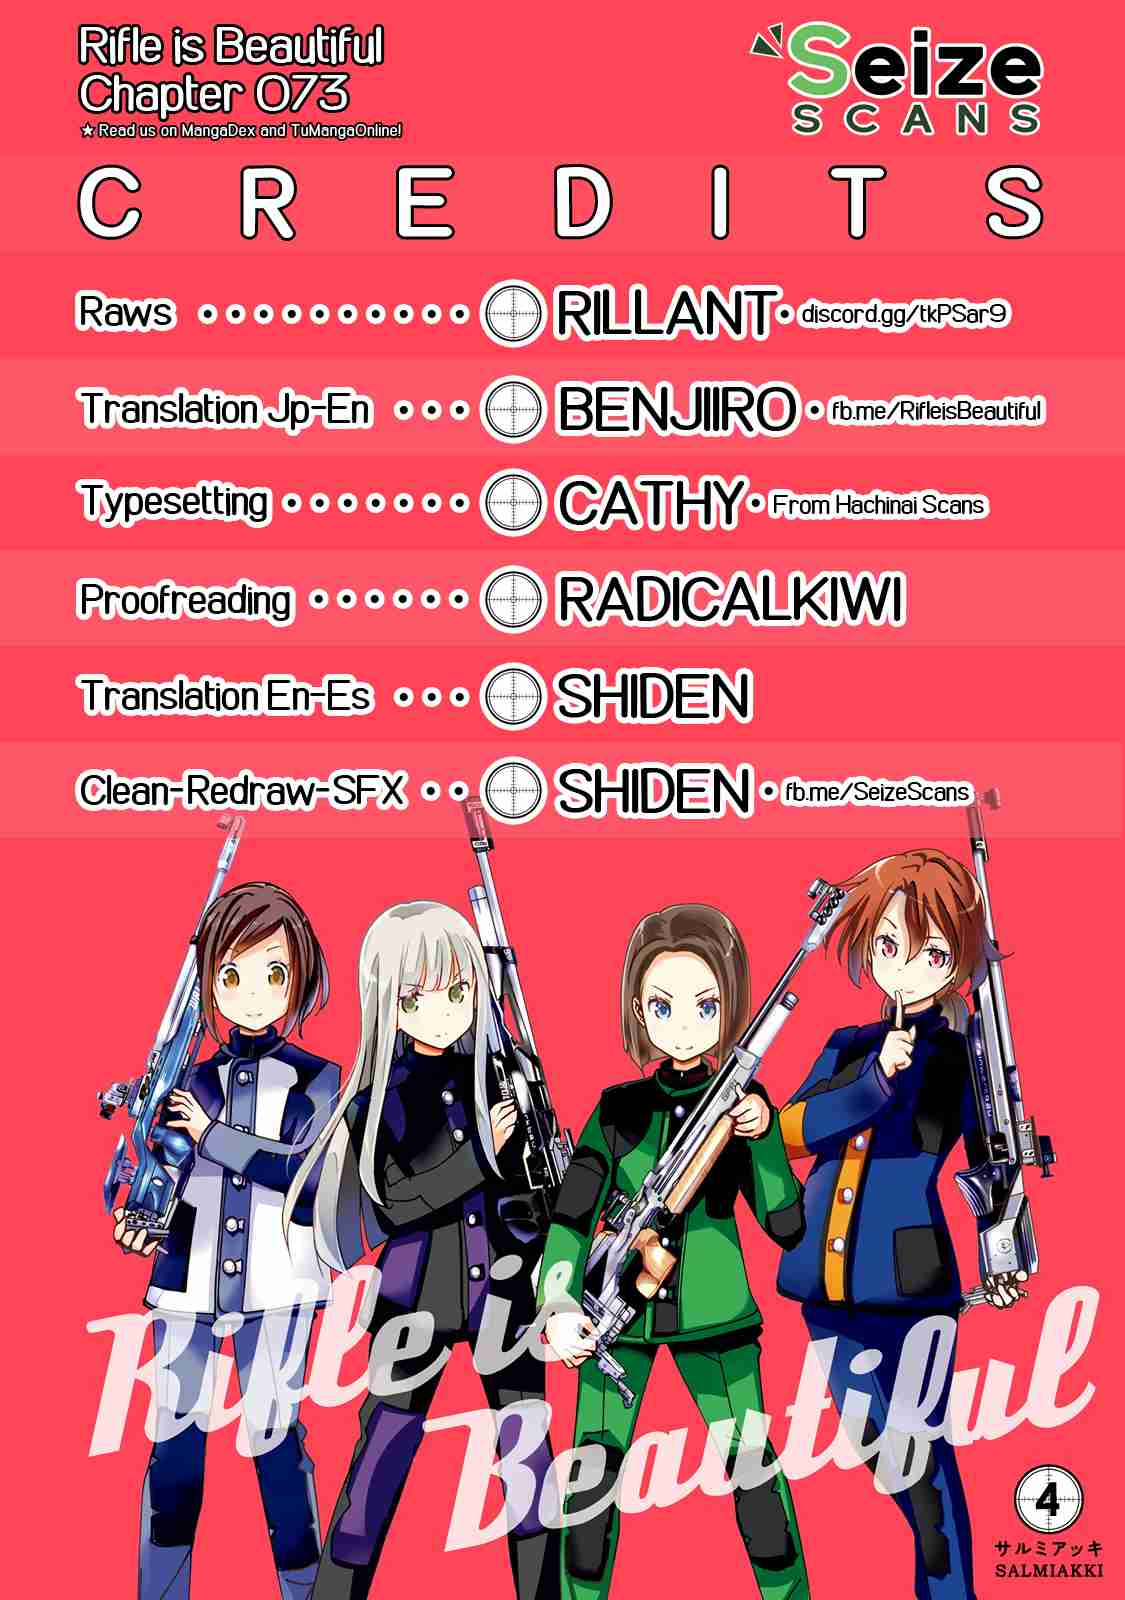 Rifle Is Beautiful Vol. 4 Ch. 73 Just like in a opening of Sazae san